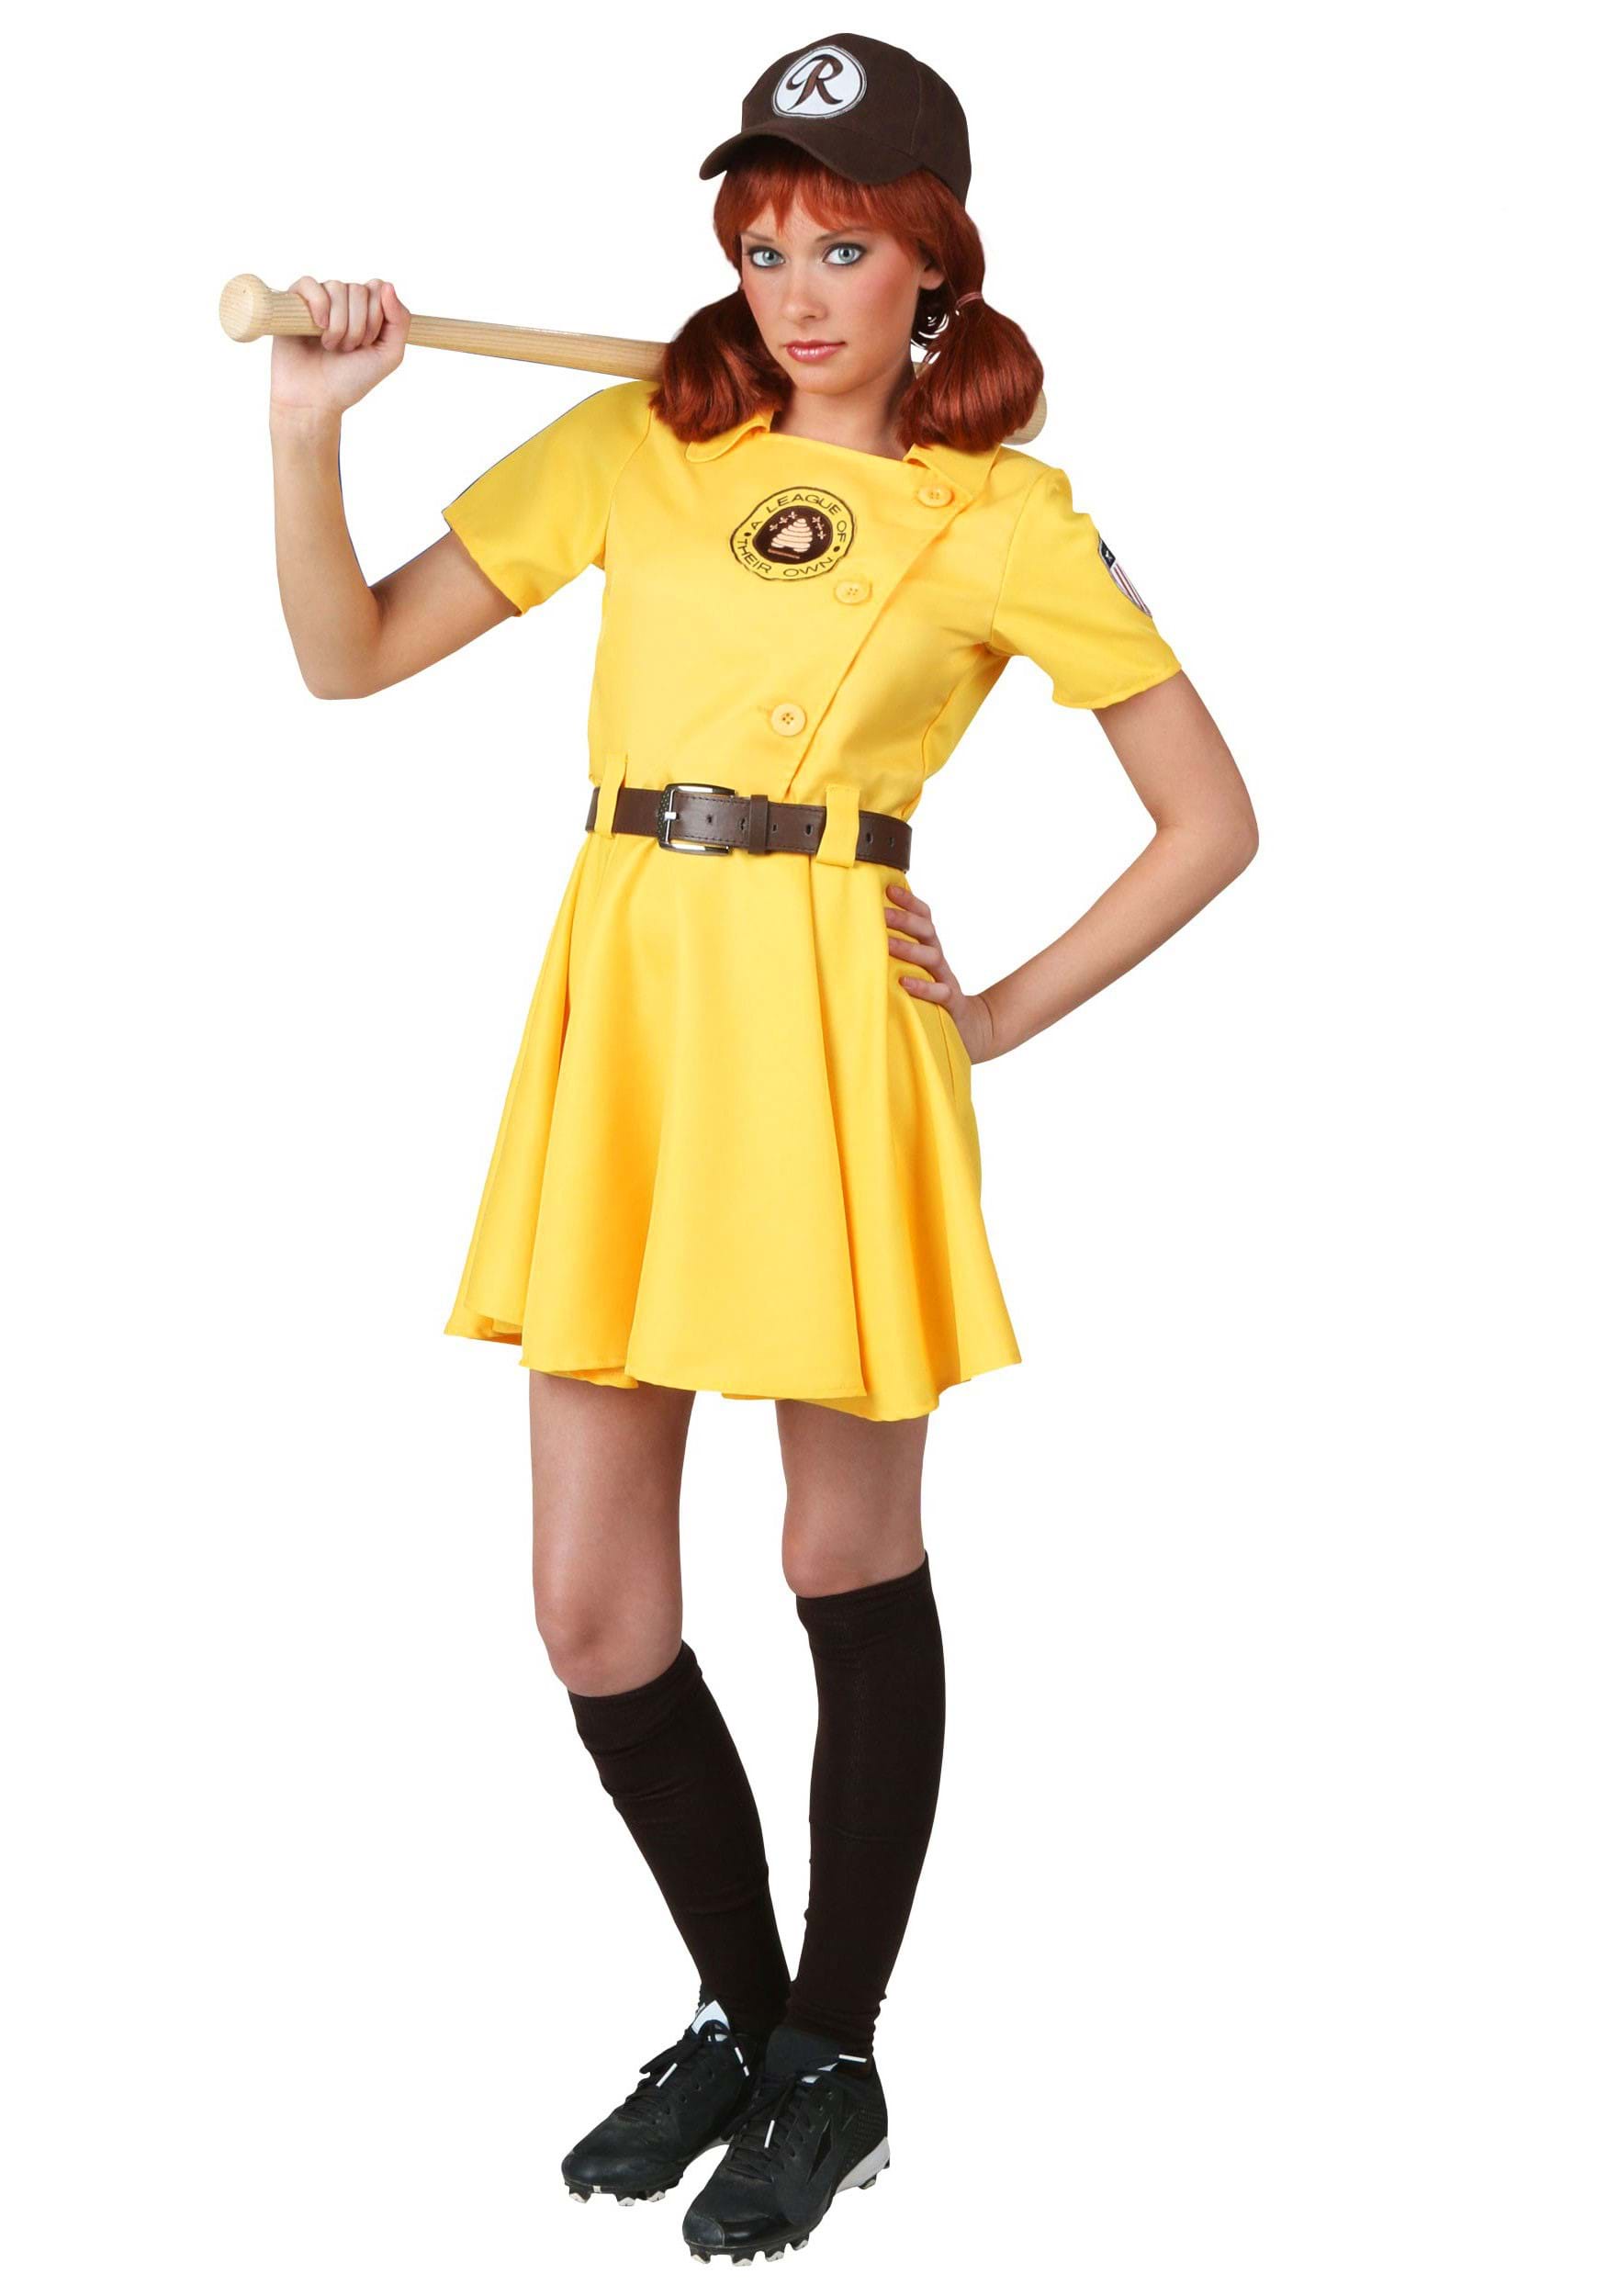 Image of Women's A League of Their Own Kit Baseball Uniform Costume | Exclusive Costumes ID LEA8302AD-XS